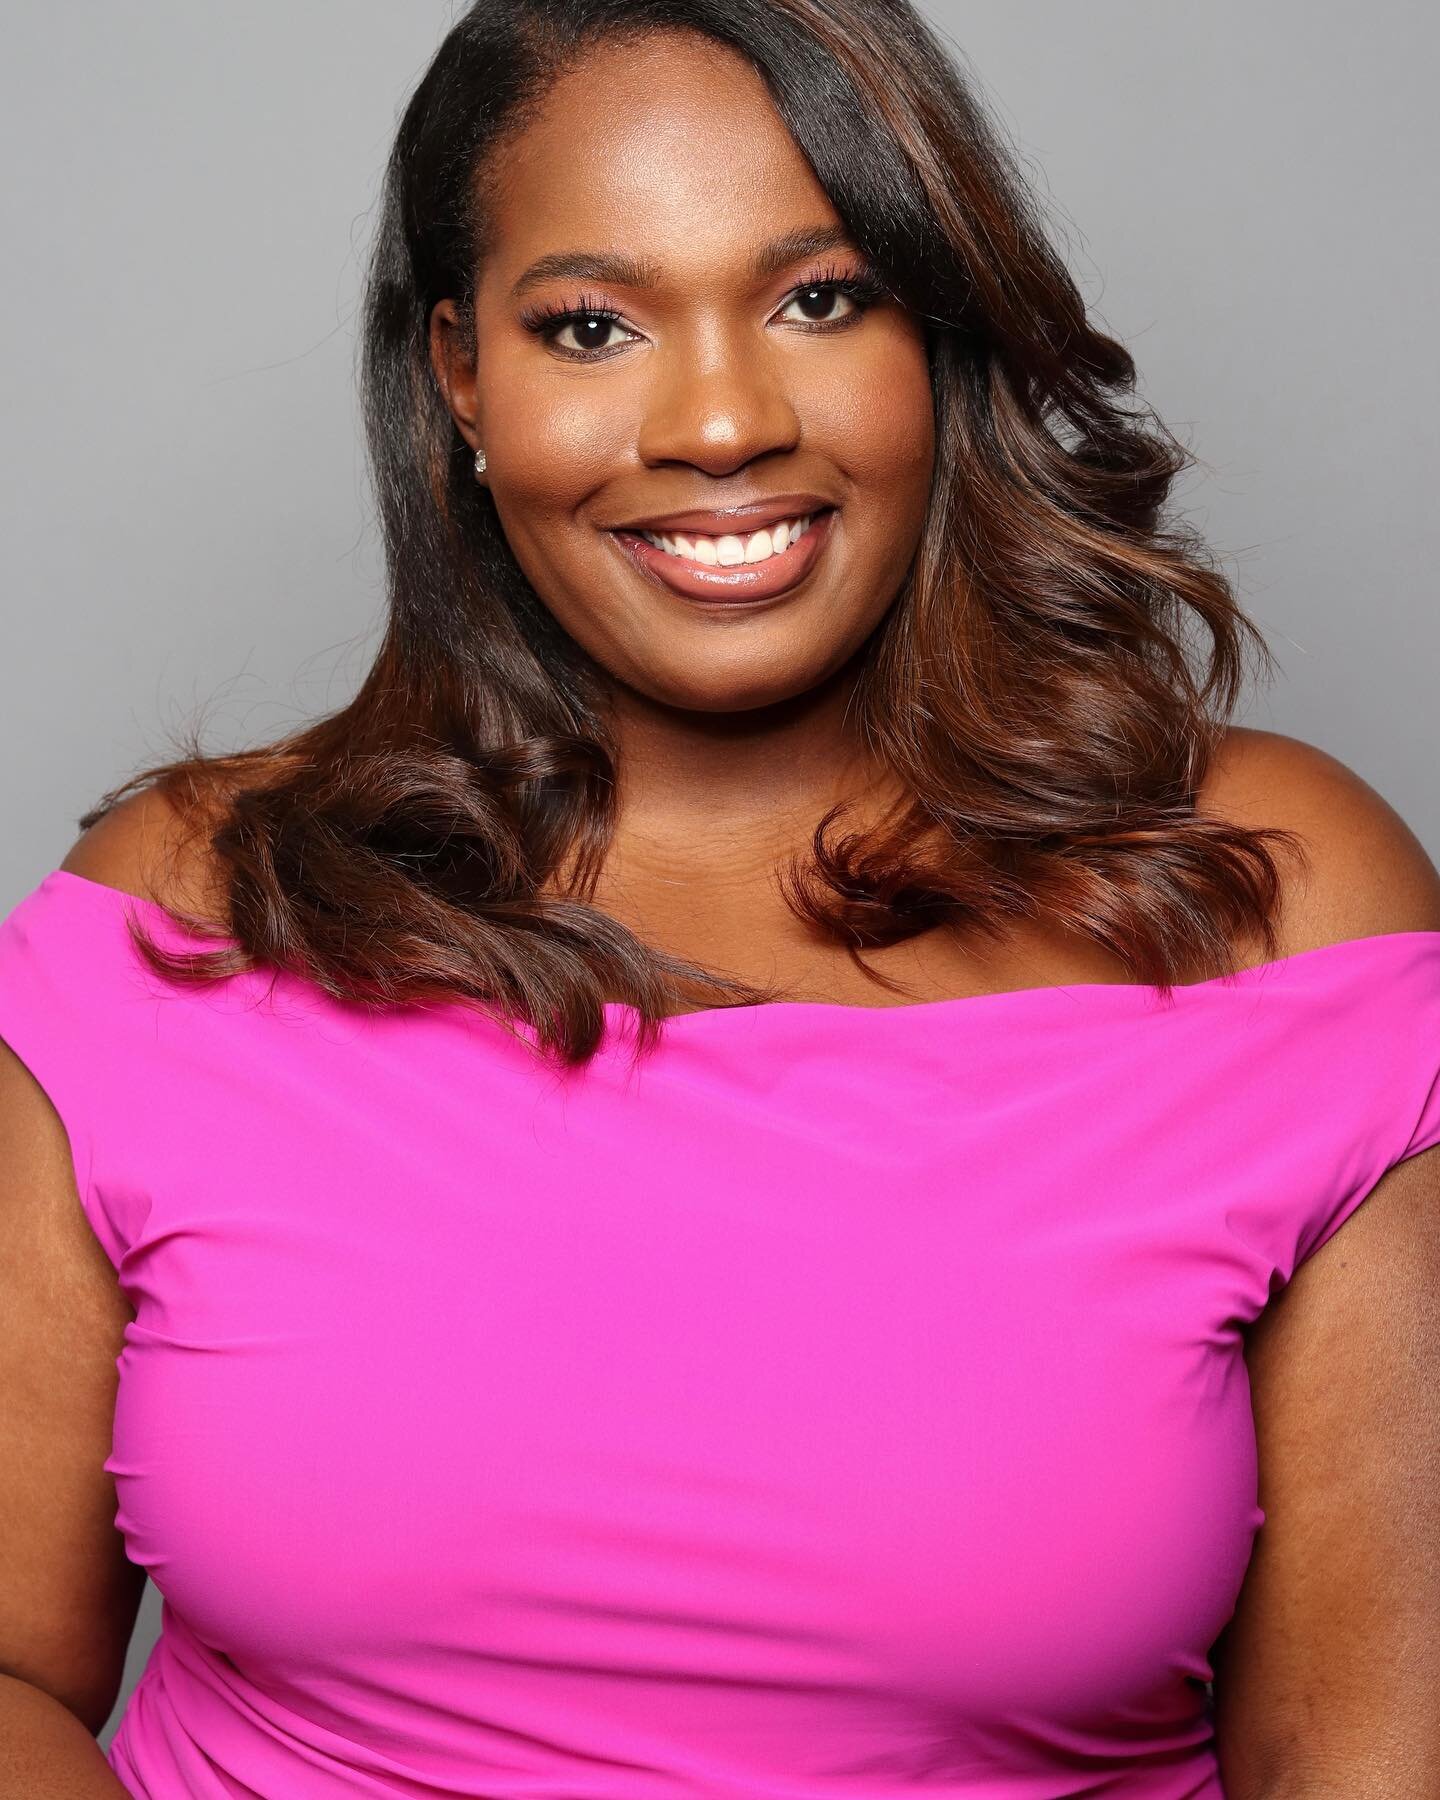 A champion for diversity and sales expert with over a decade of experience, @chantelmedia is the CEO &amp; Founder of Sistas In Sales. @sistasinsales (SIS) is the first global organization to serve women of color in professional sales careers. With o